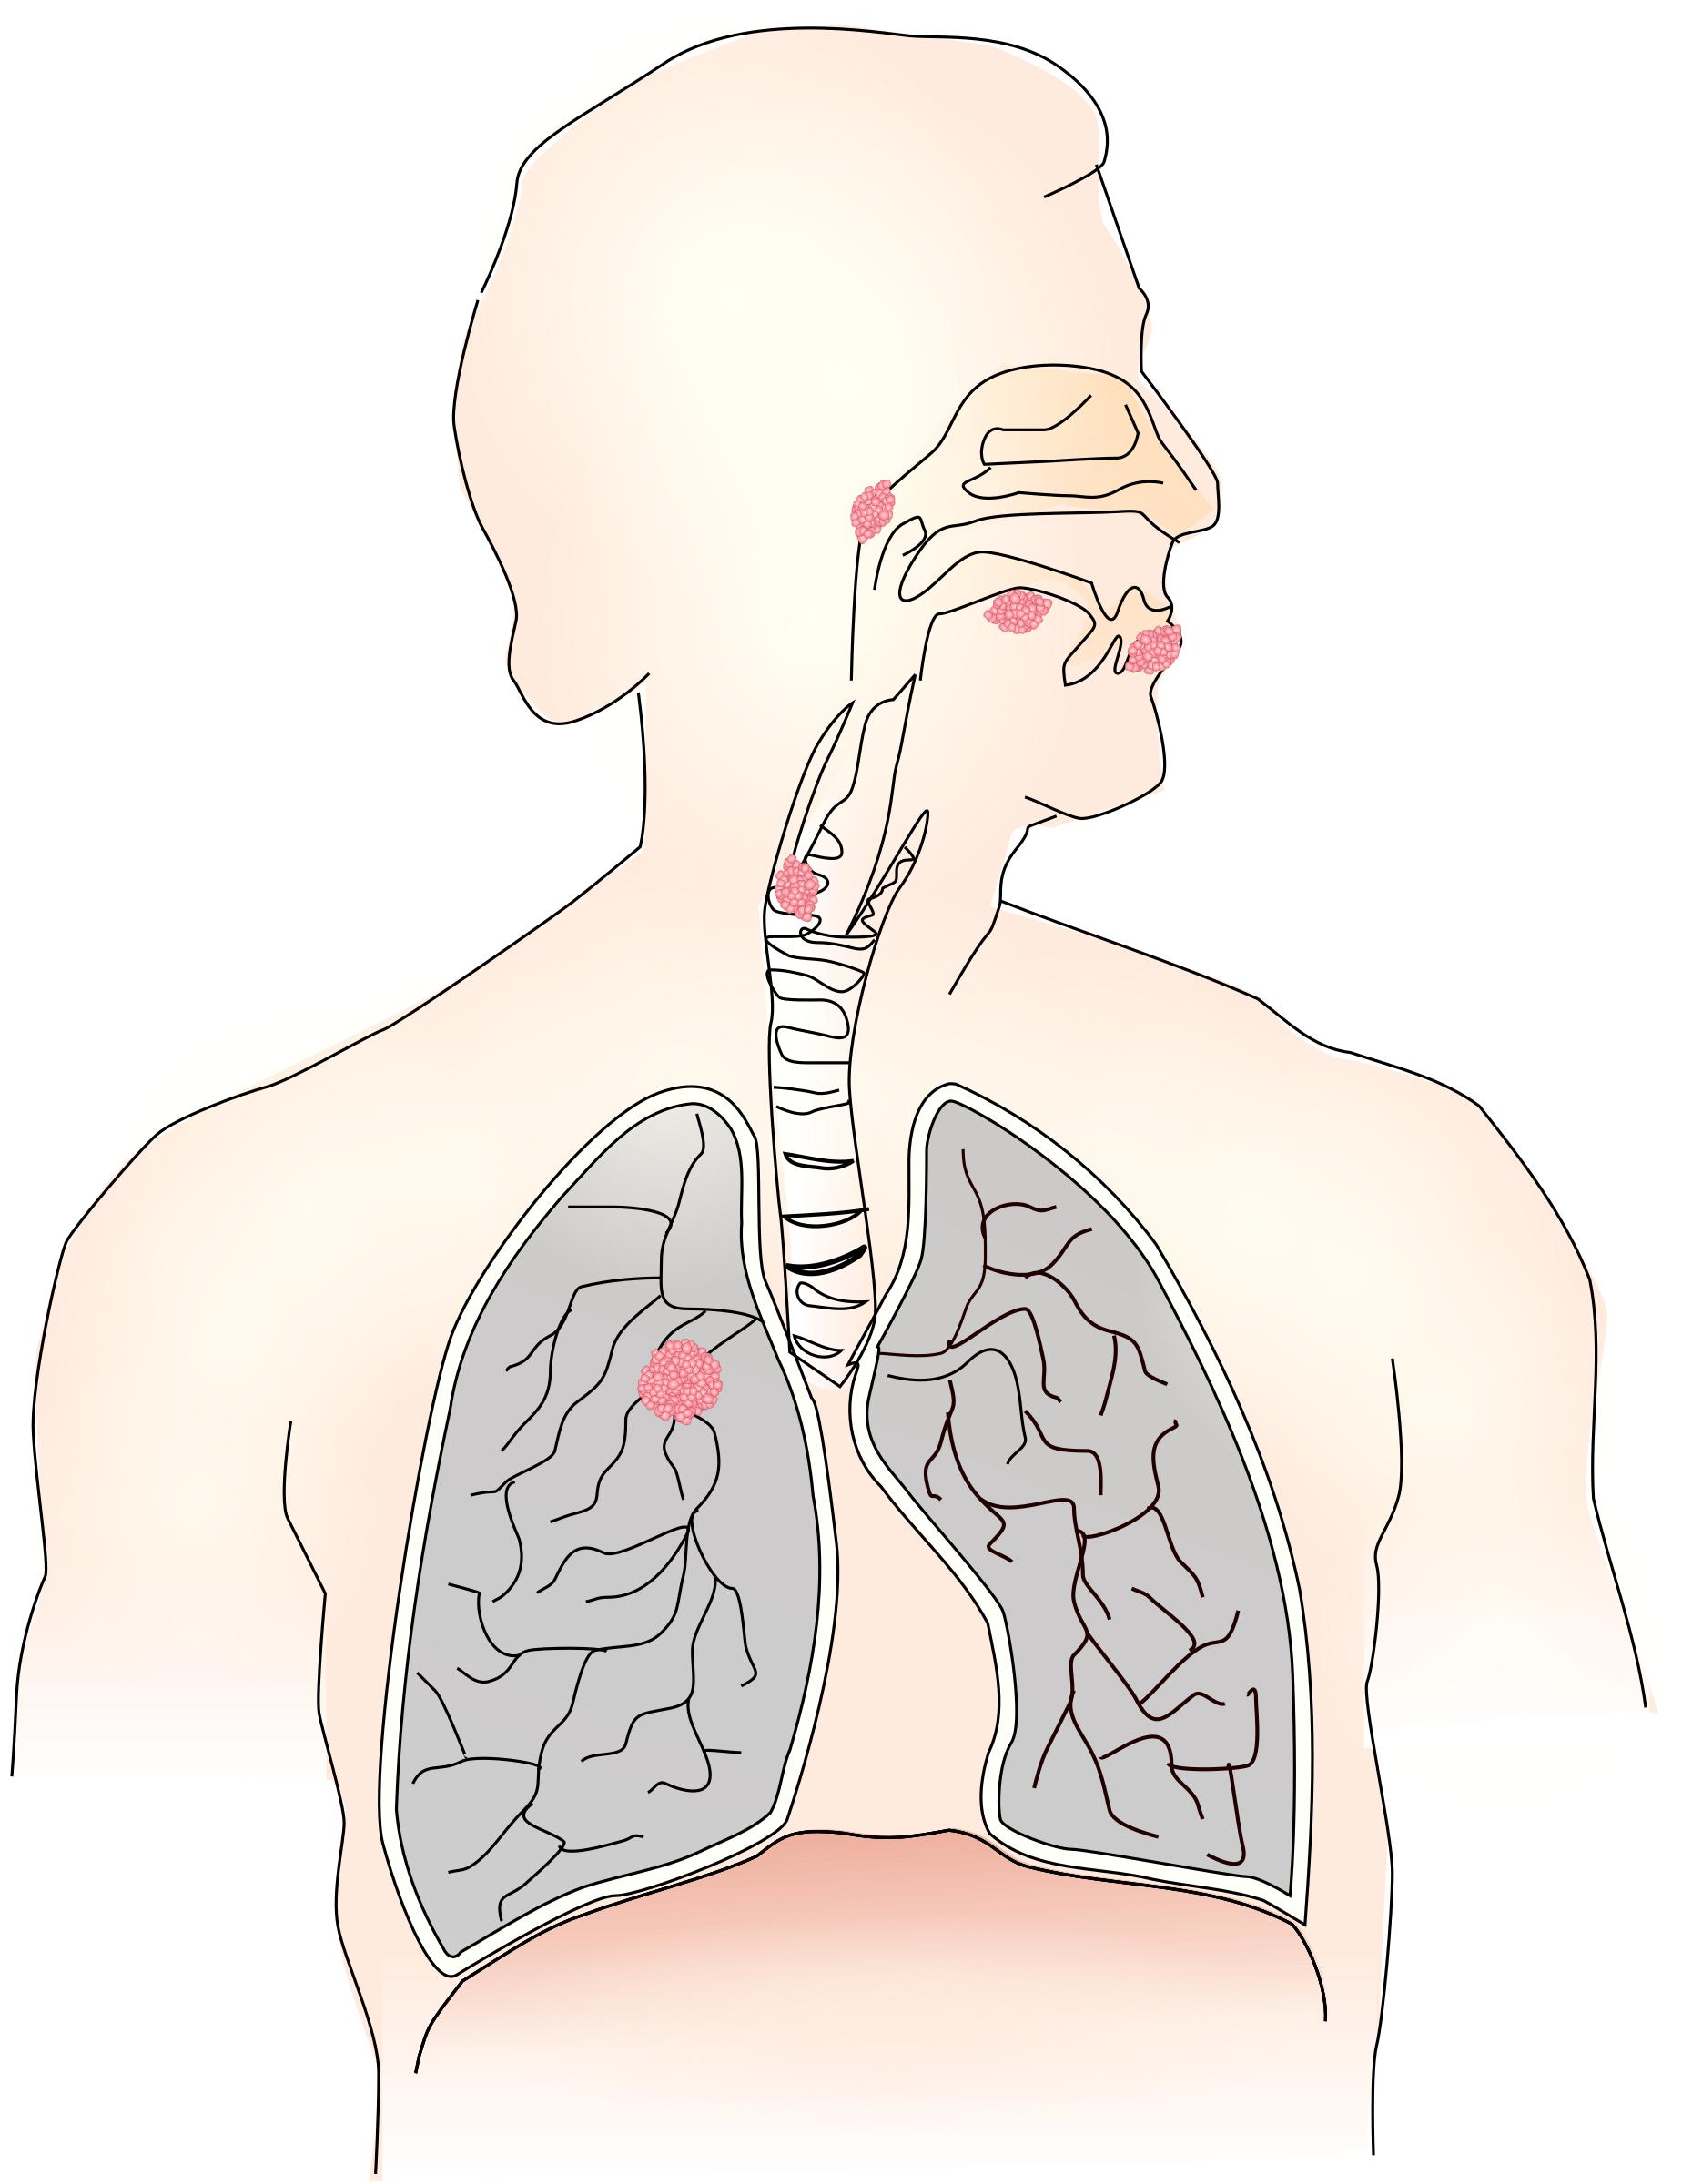 Cancer caused by smoking I png